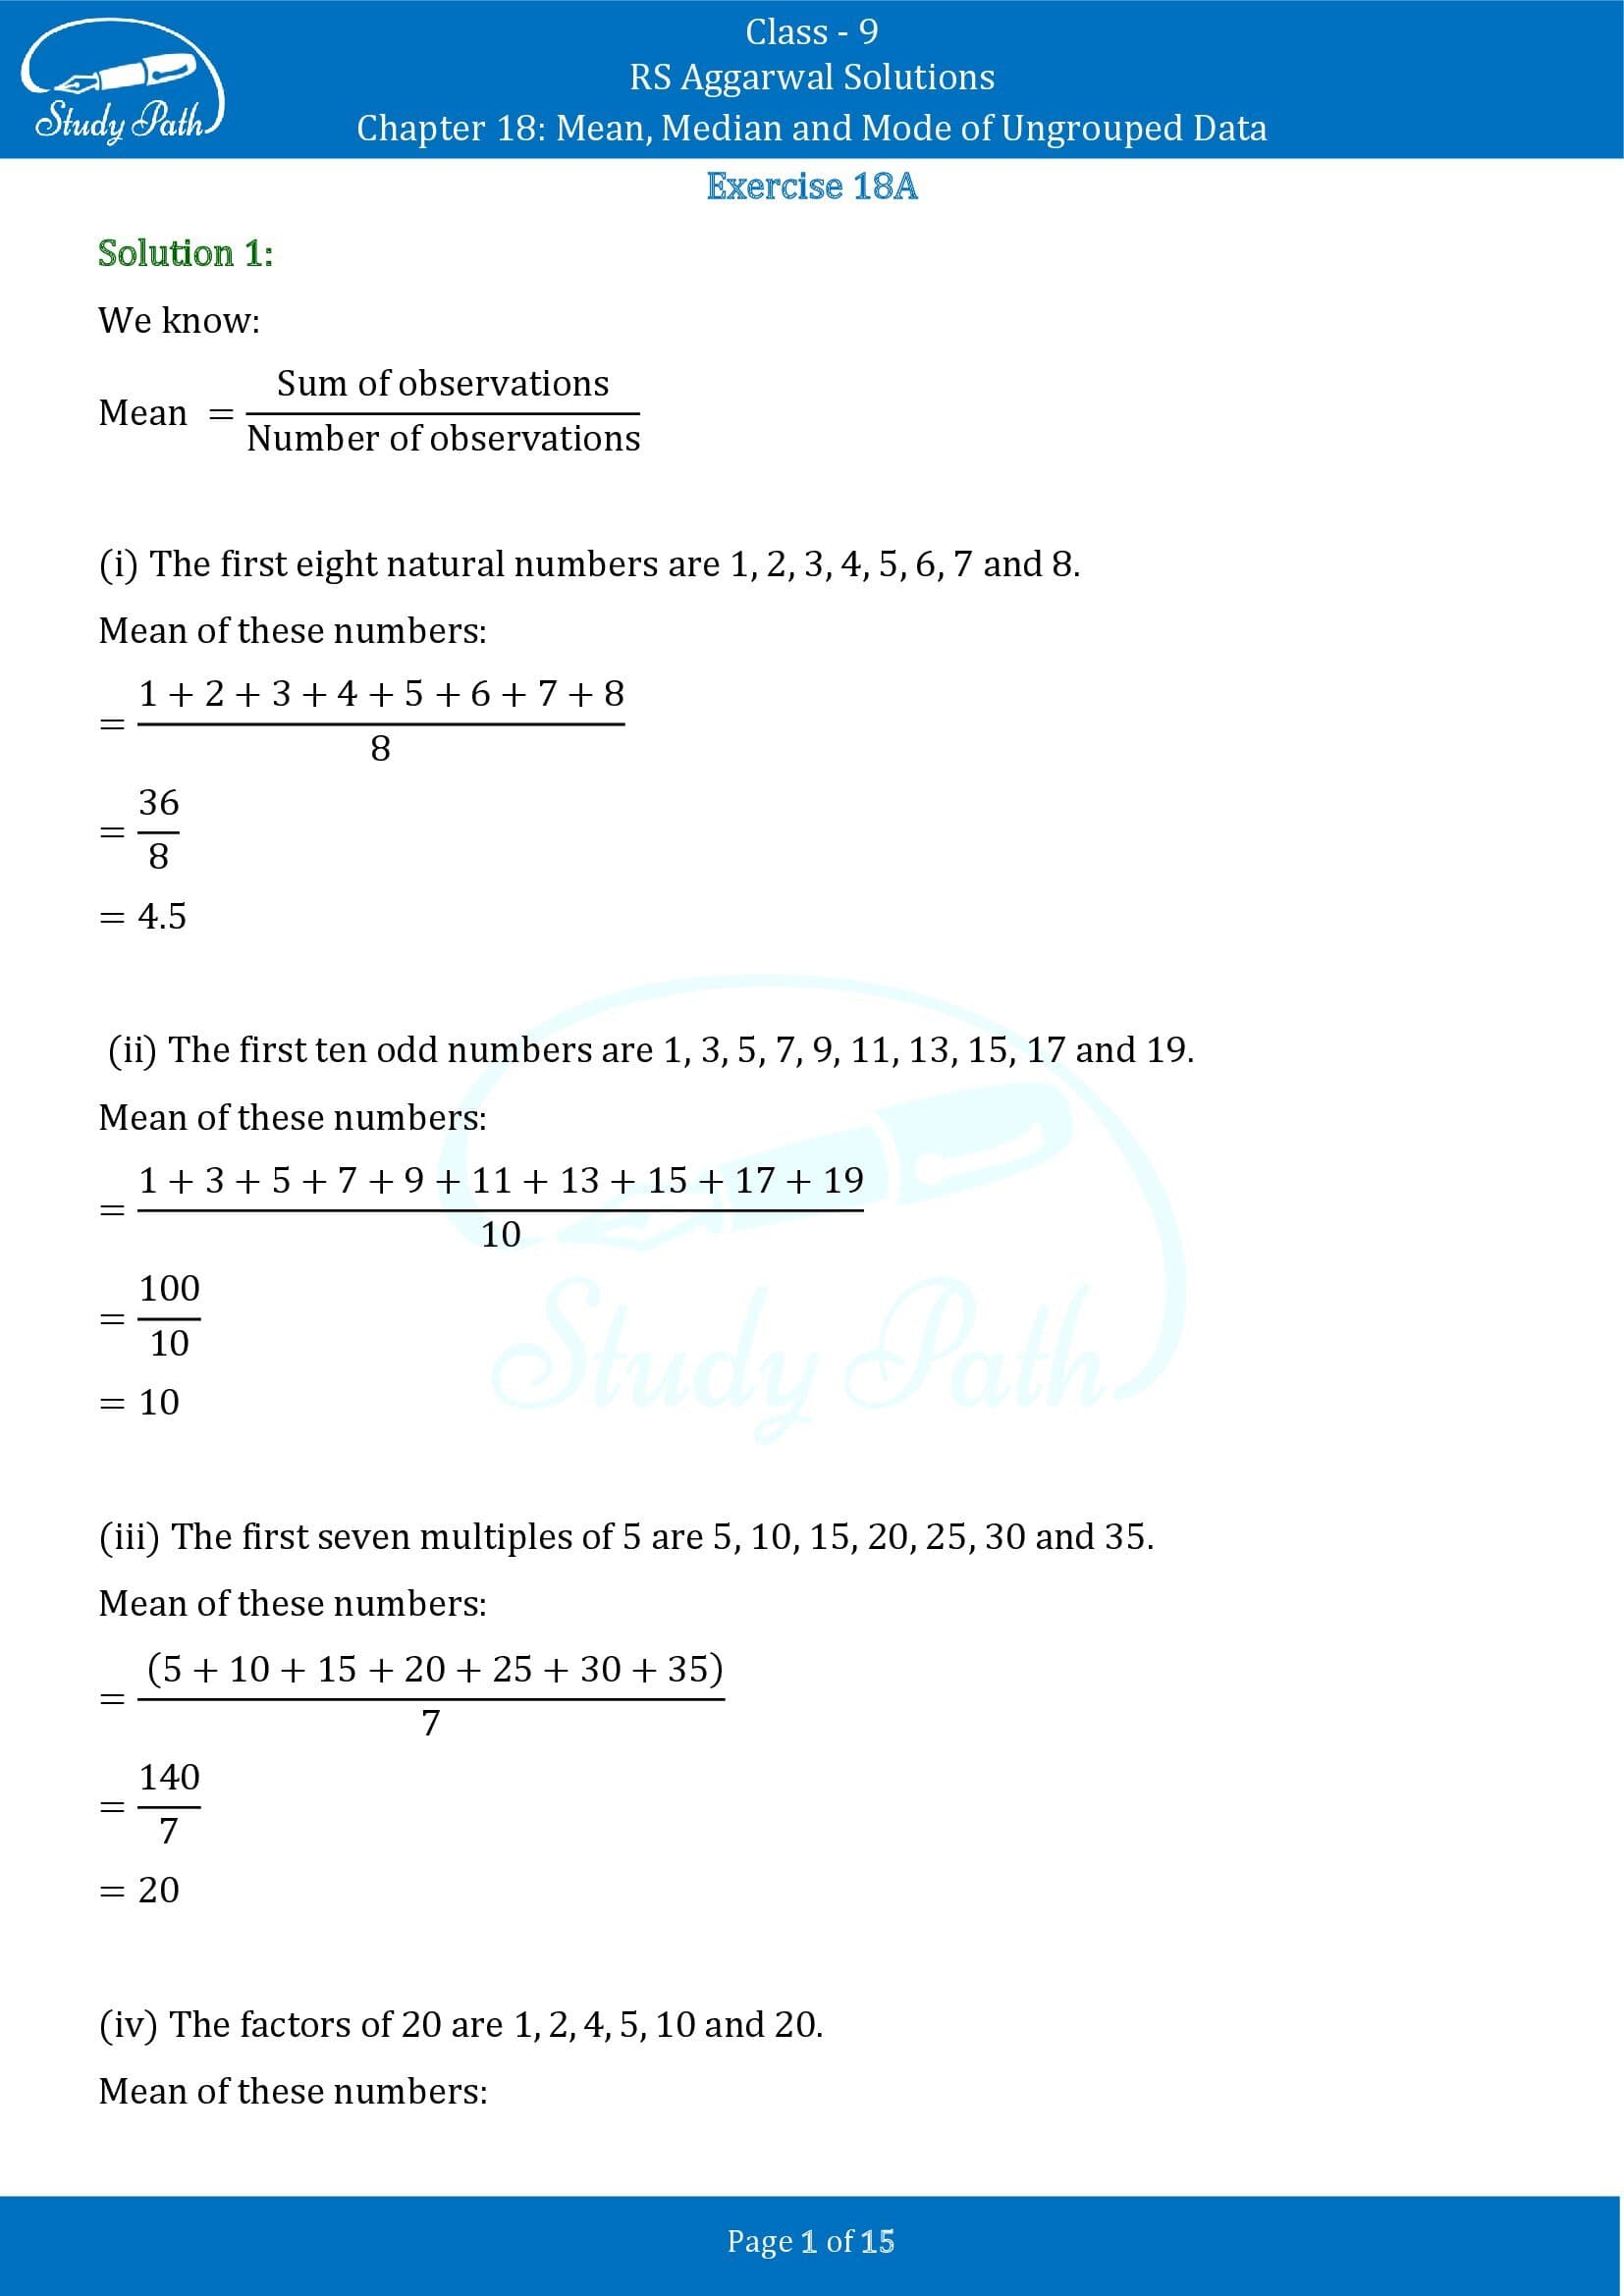 RS Aggarwal Solutions Class 9 Chapter 18 Mean Median and Mode of Ungrouped Data Exercise 18A 00001